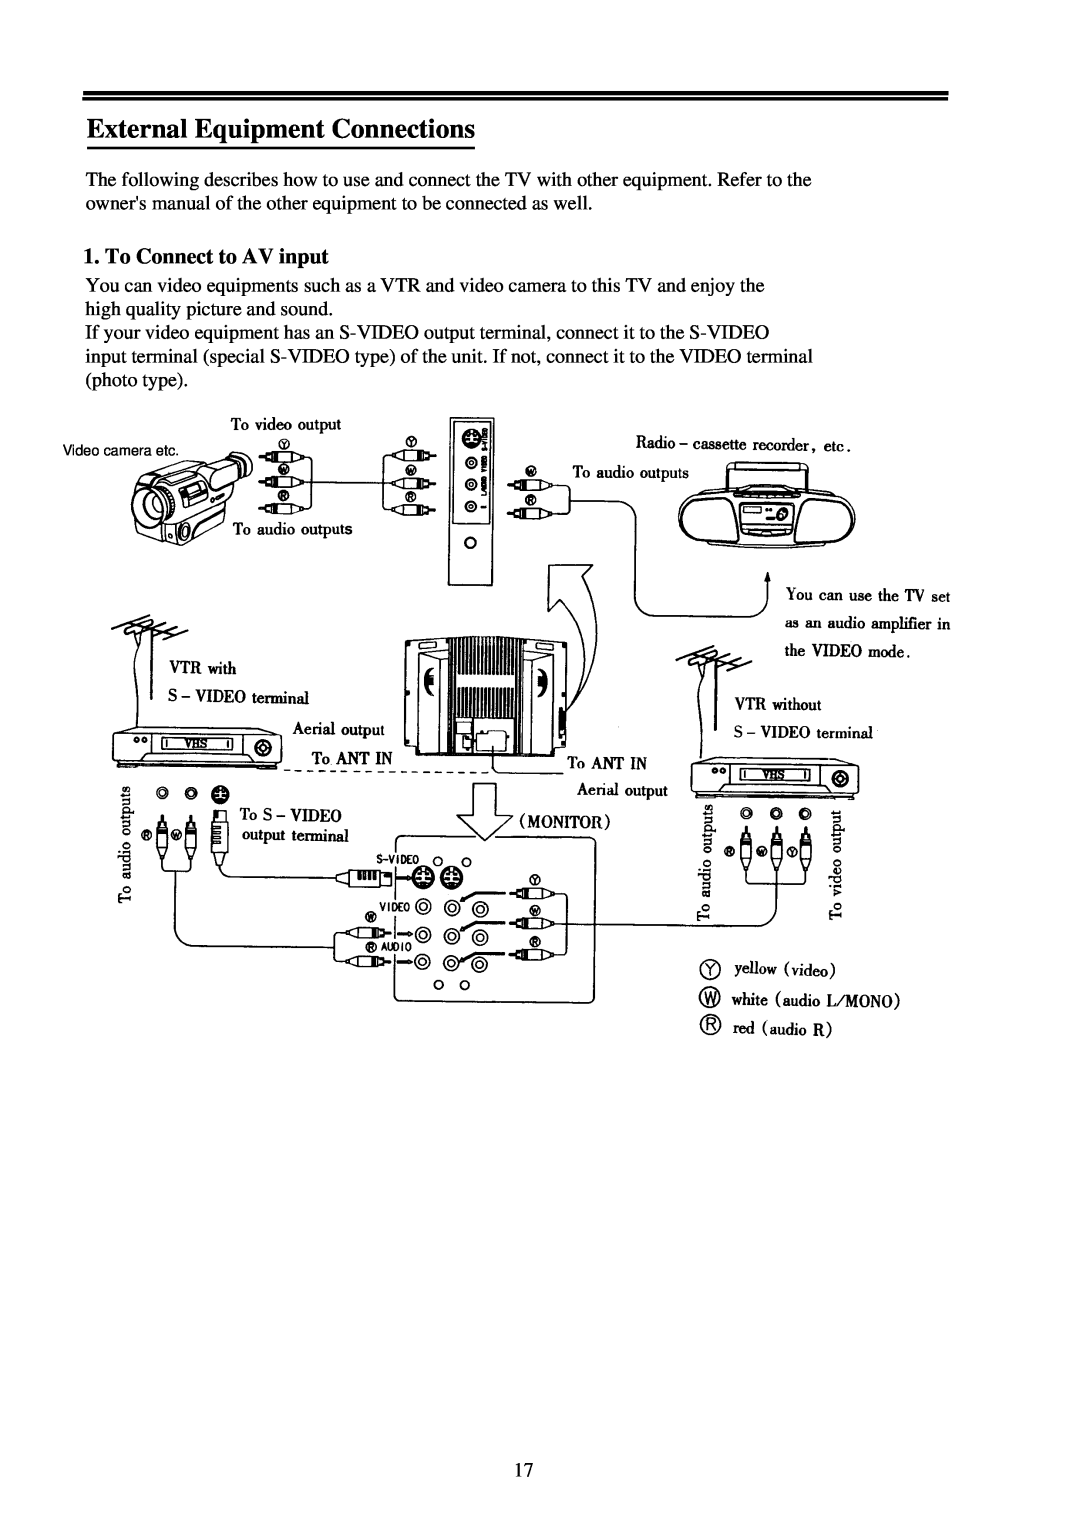 Palsonic 7118 owner manual External Equipment Connections, To Connect to AV input 